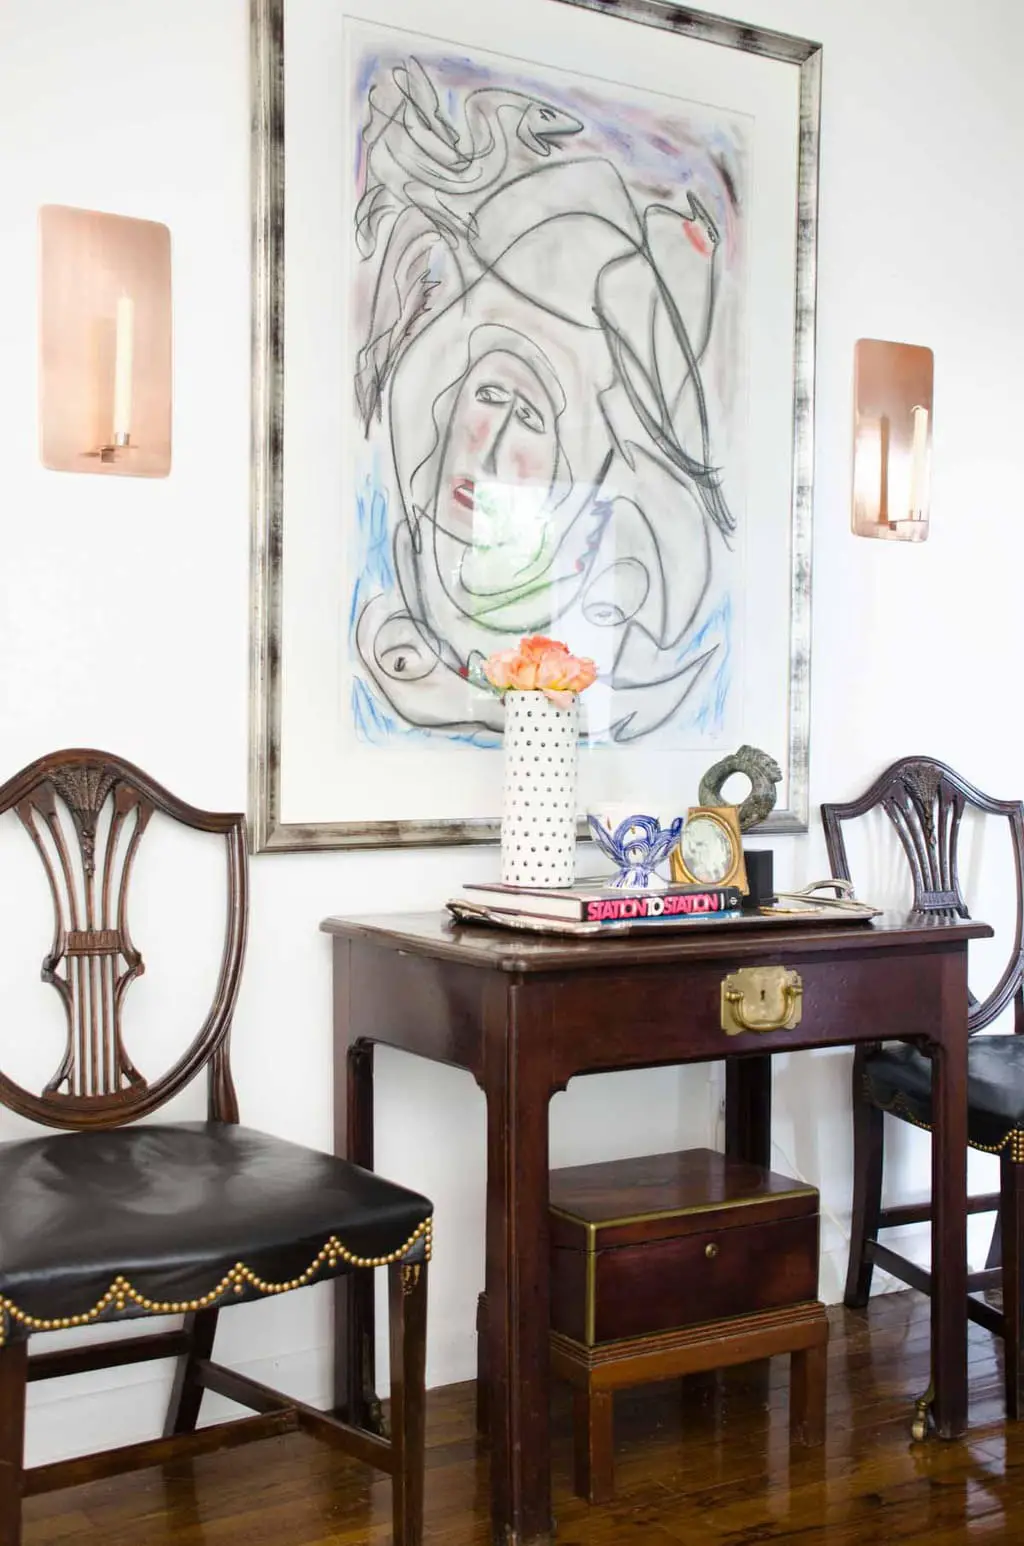 @thouswellblog's living room makeover, mixing traditional and modern design elements